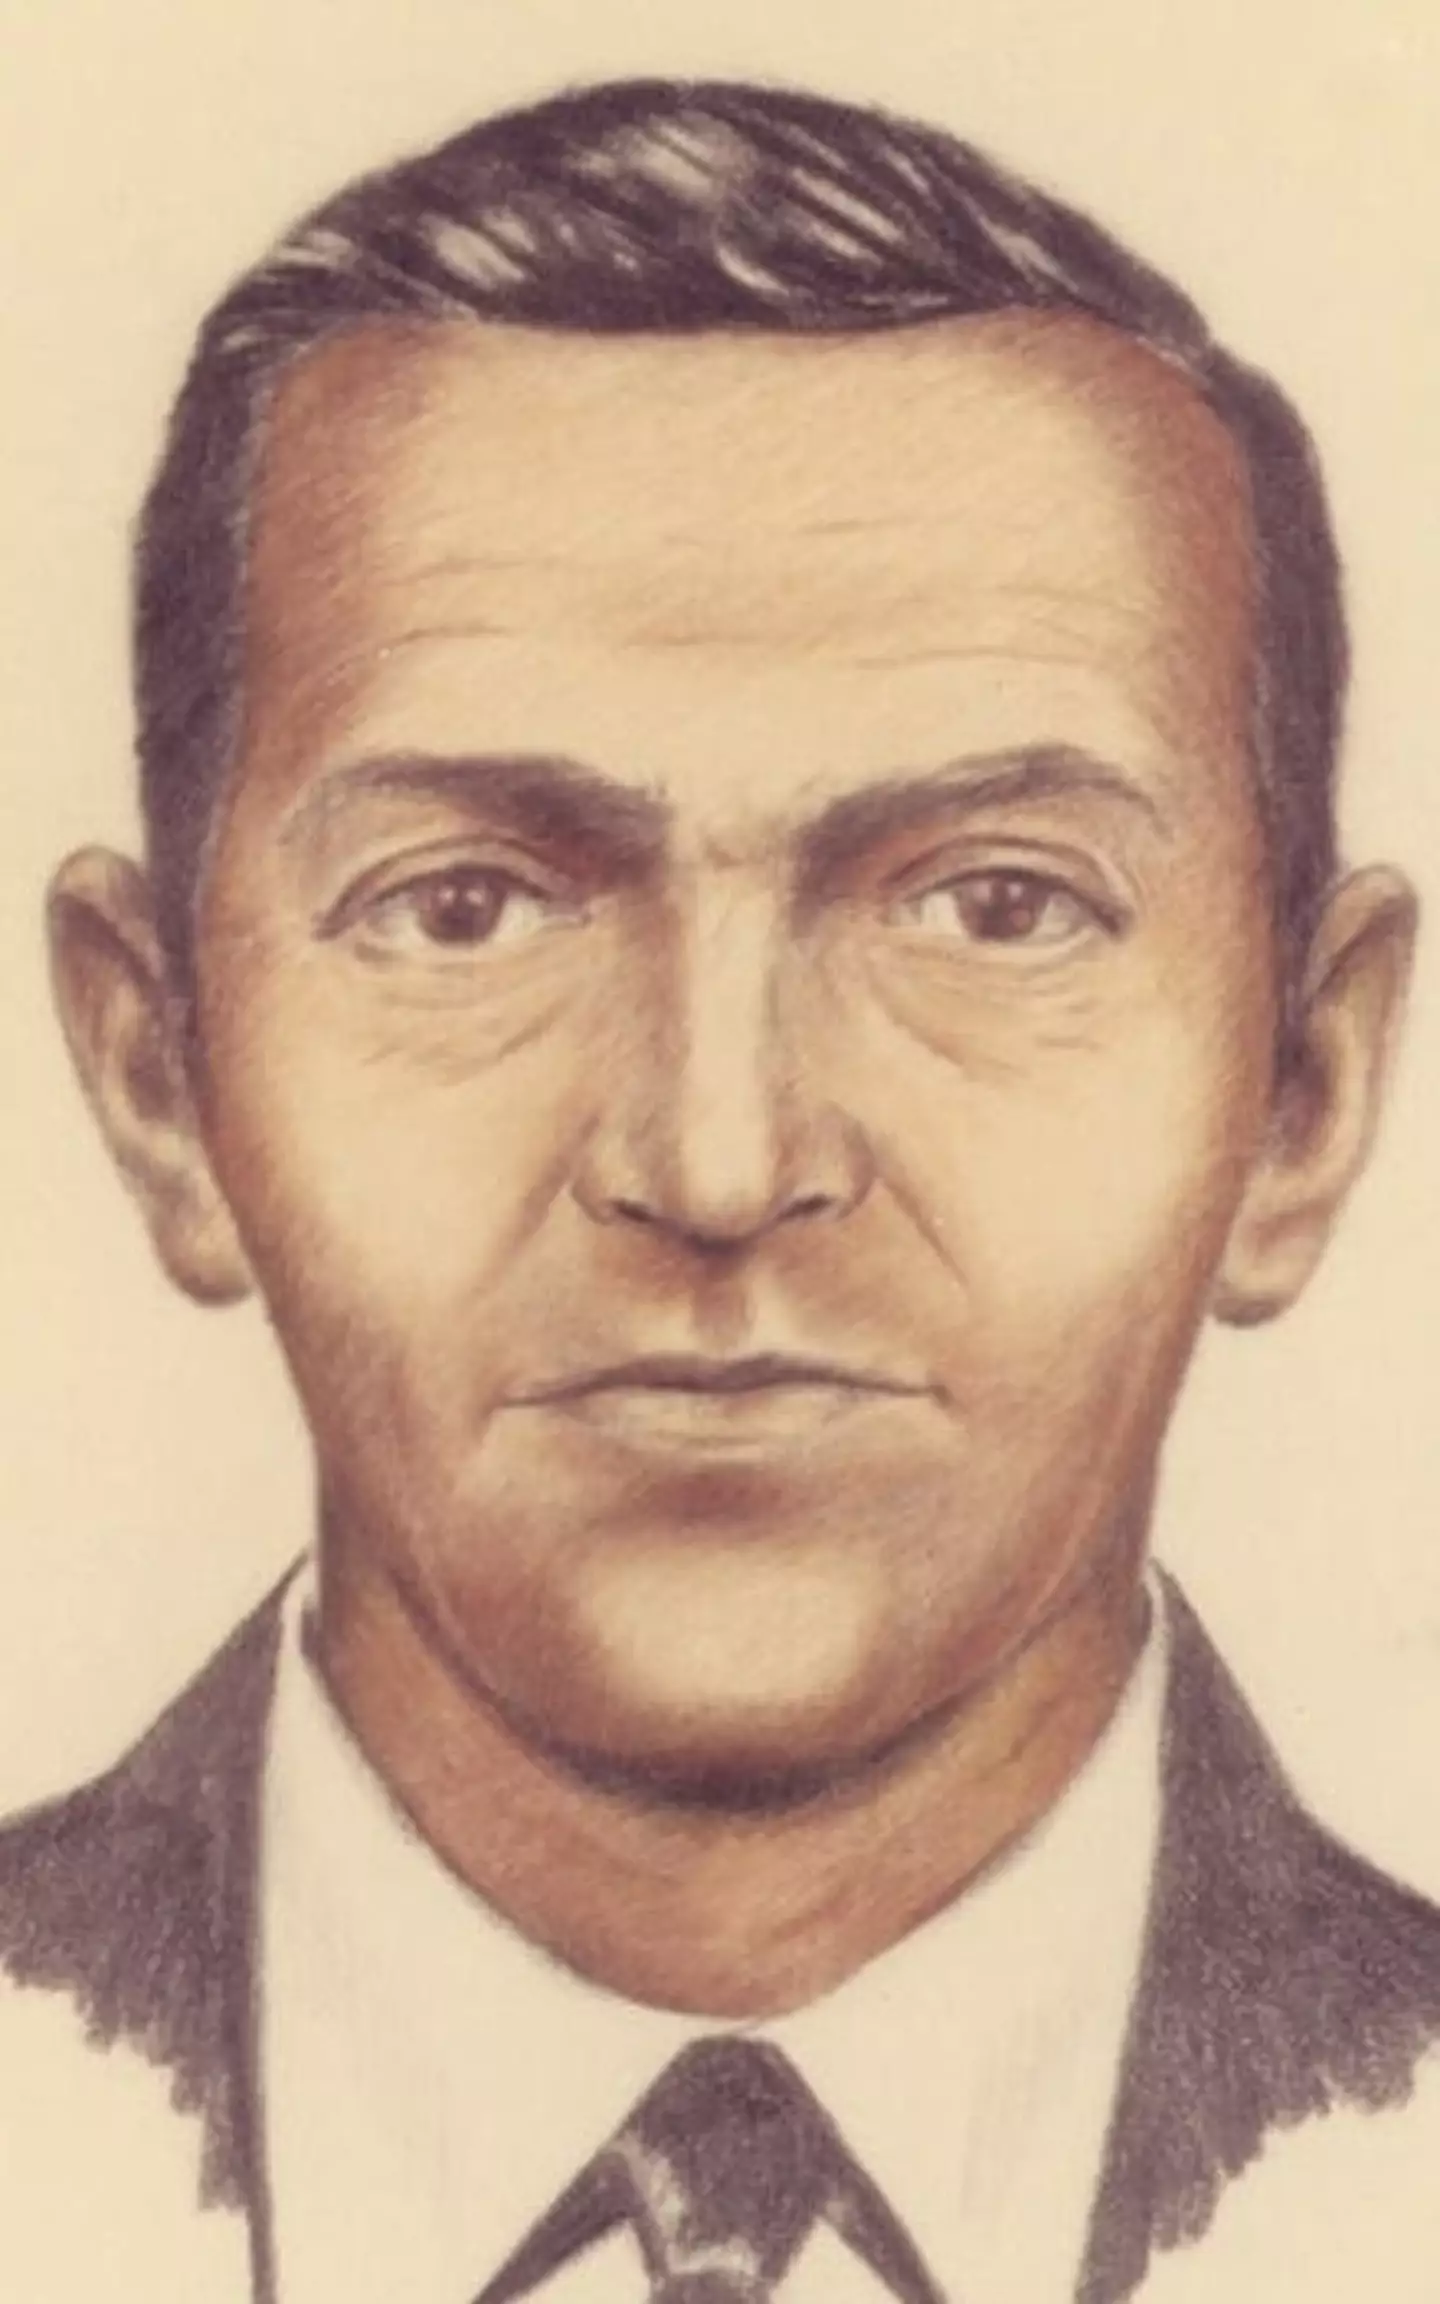 A composite drawing of the hijacker known as D.B Cooper from the 1970s.